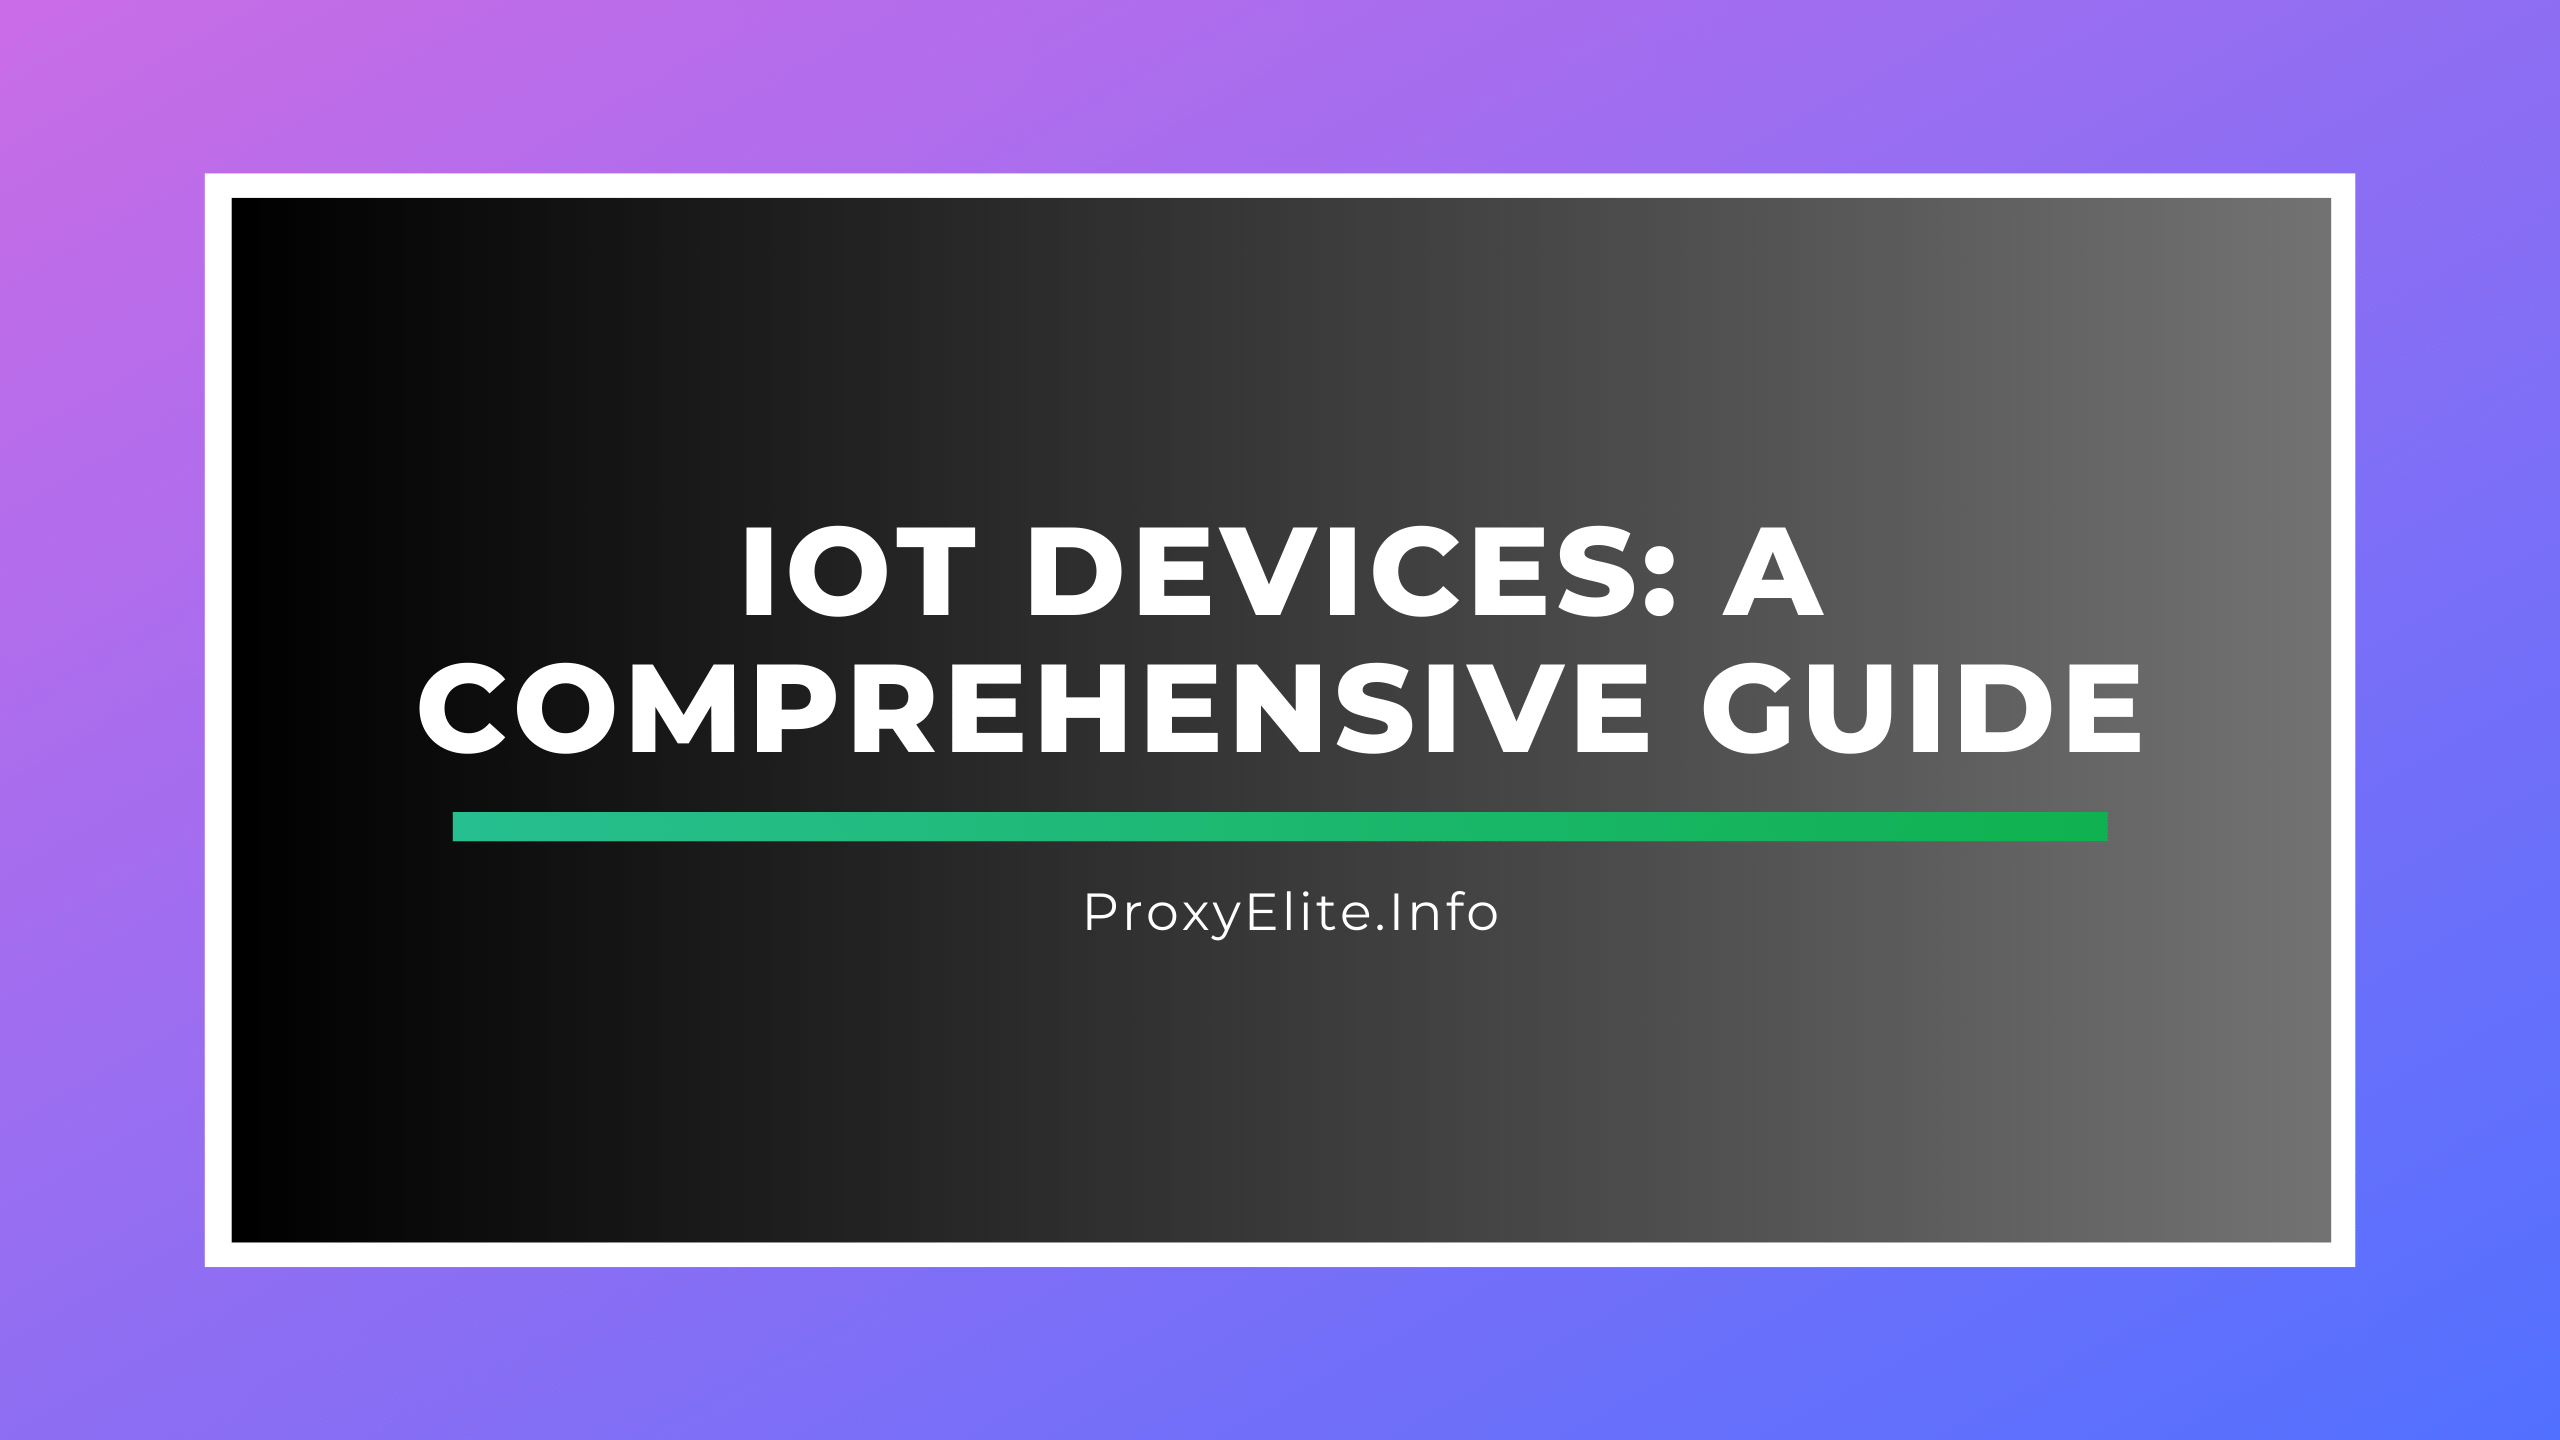 IoT Devices: A Comprehensive Guide